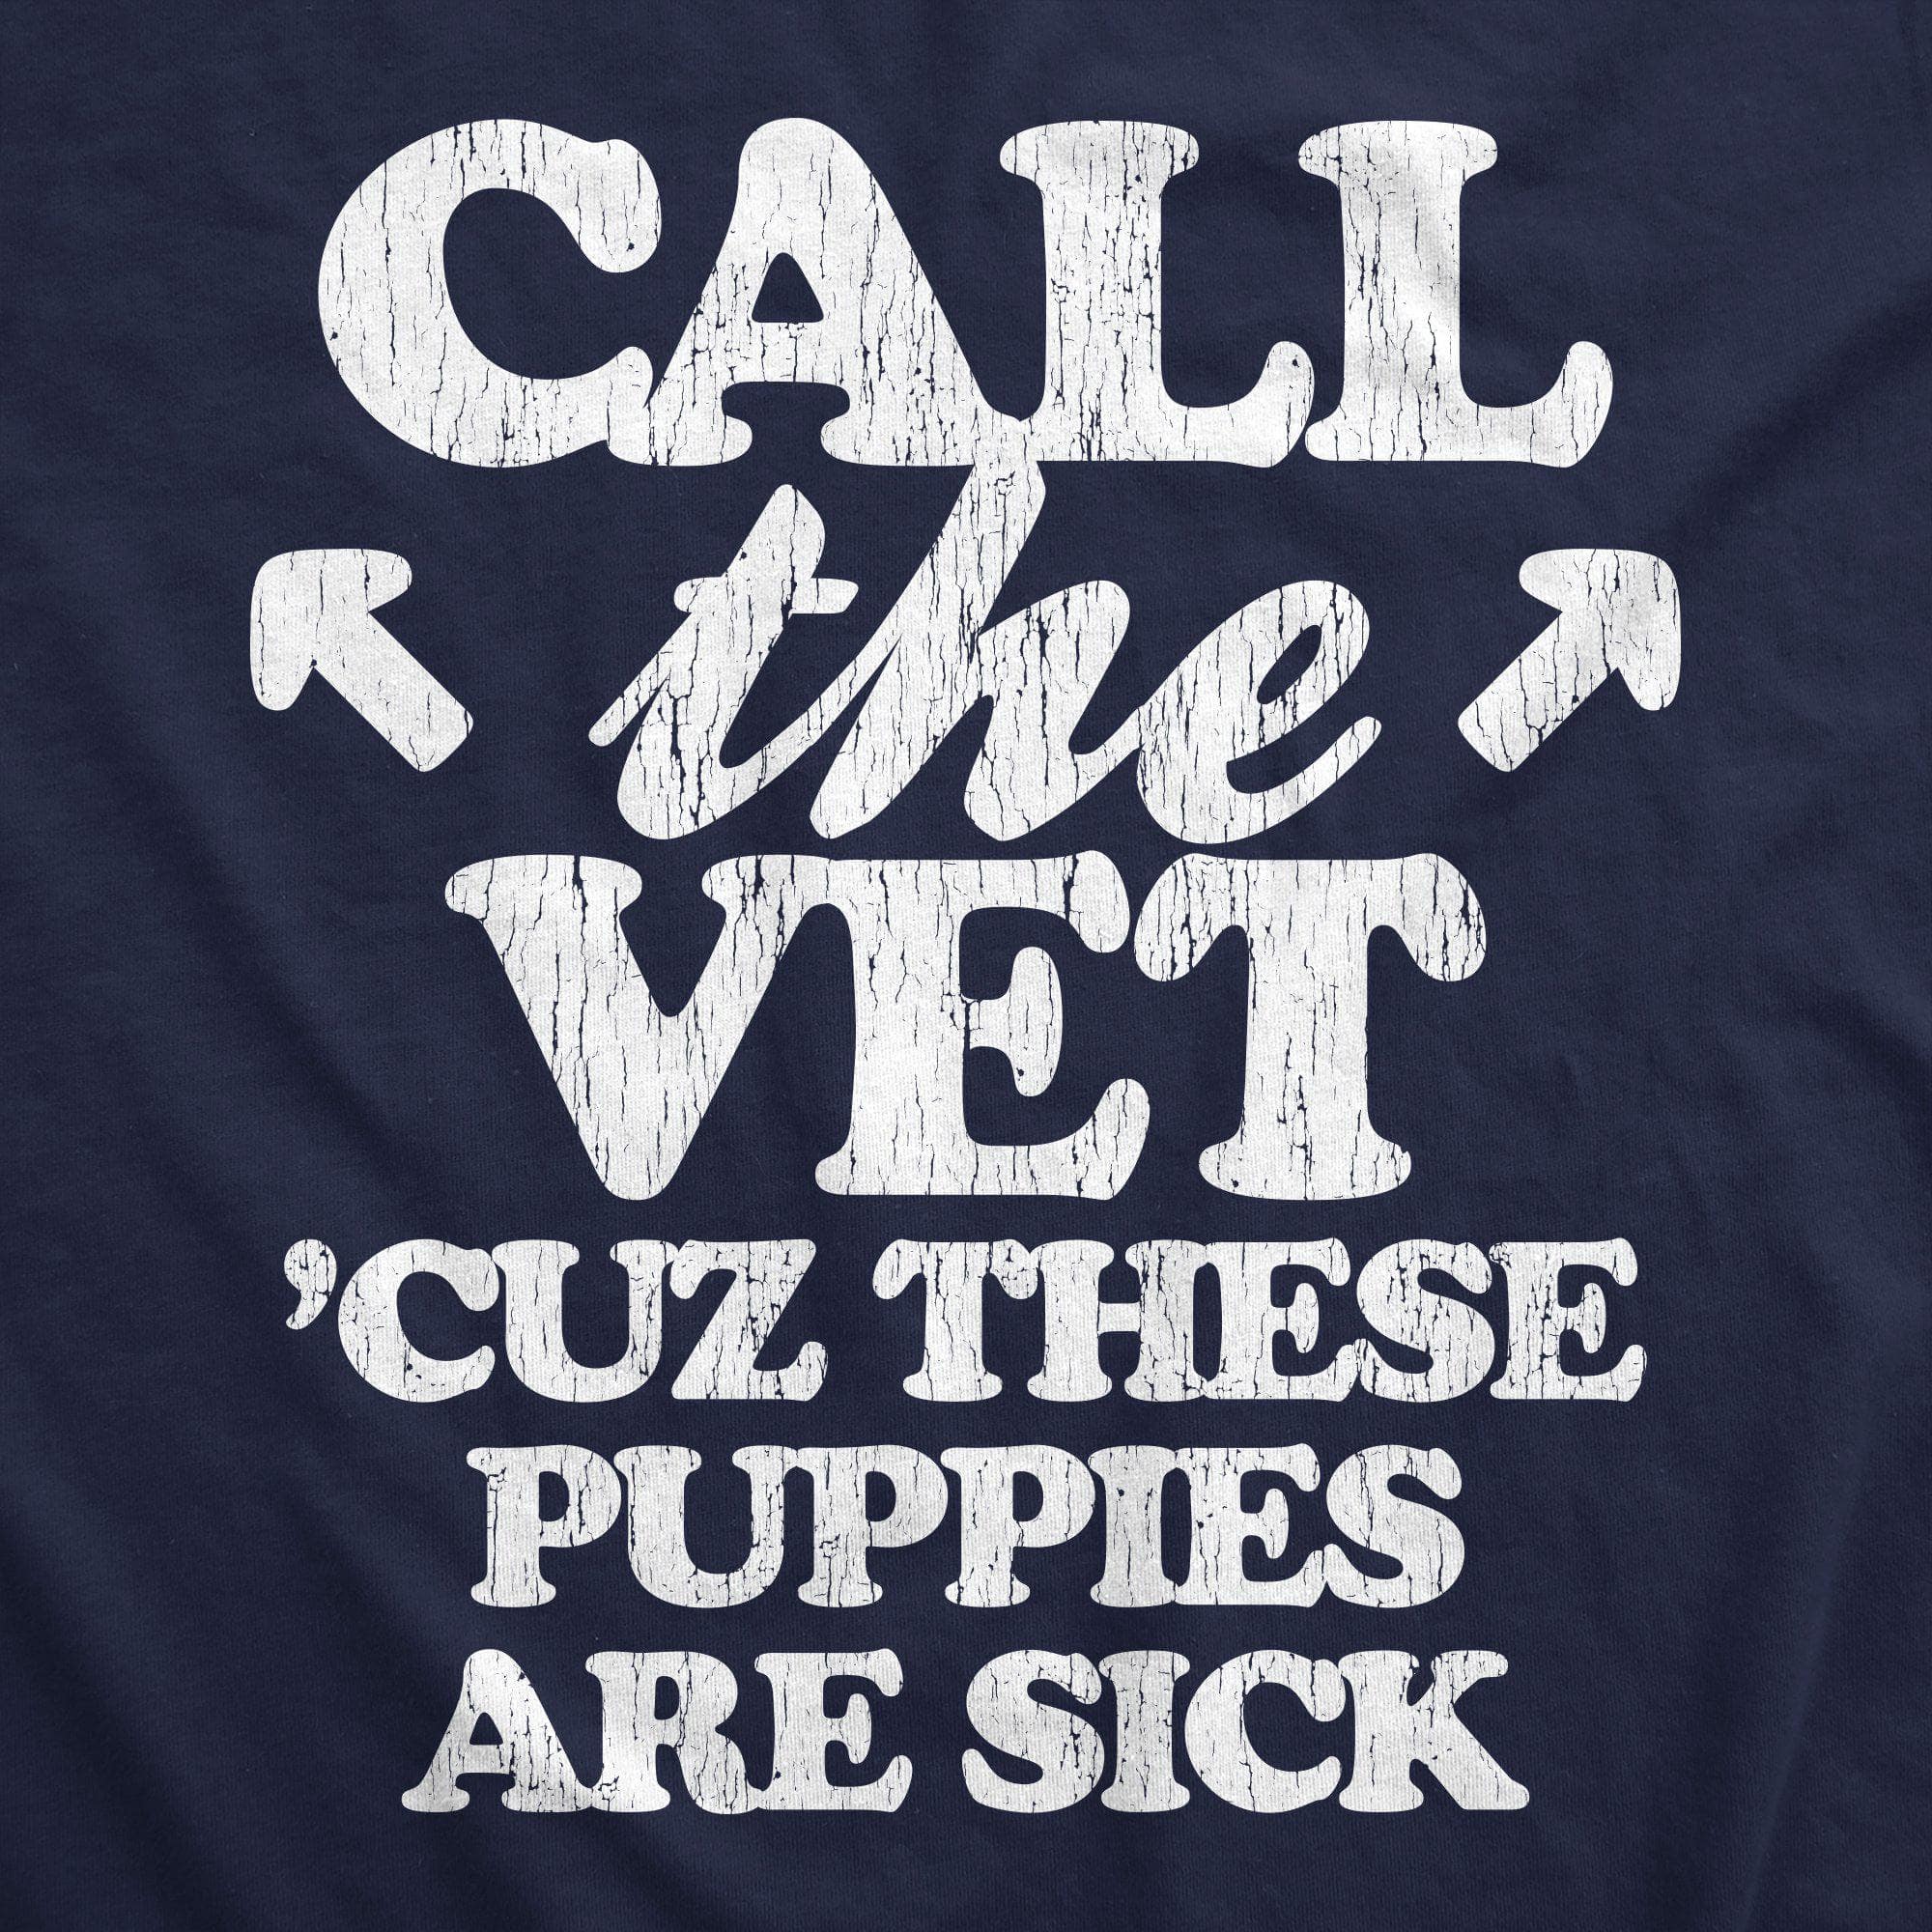 Call The Vet Cuz These Puppies Are Sick Women's Tank Top - Crazy Dog T-Shirts